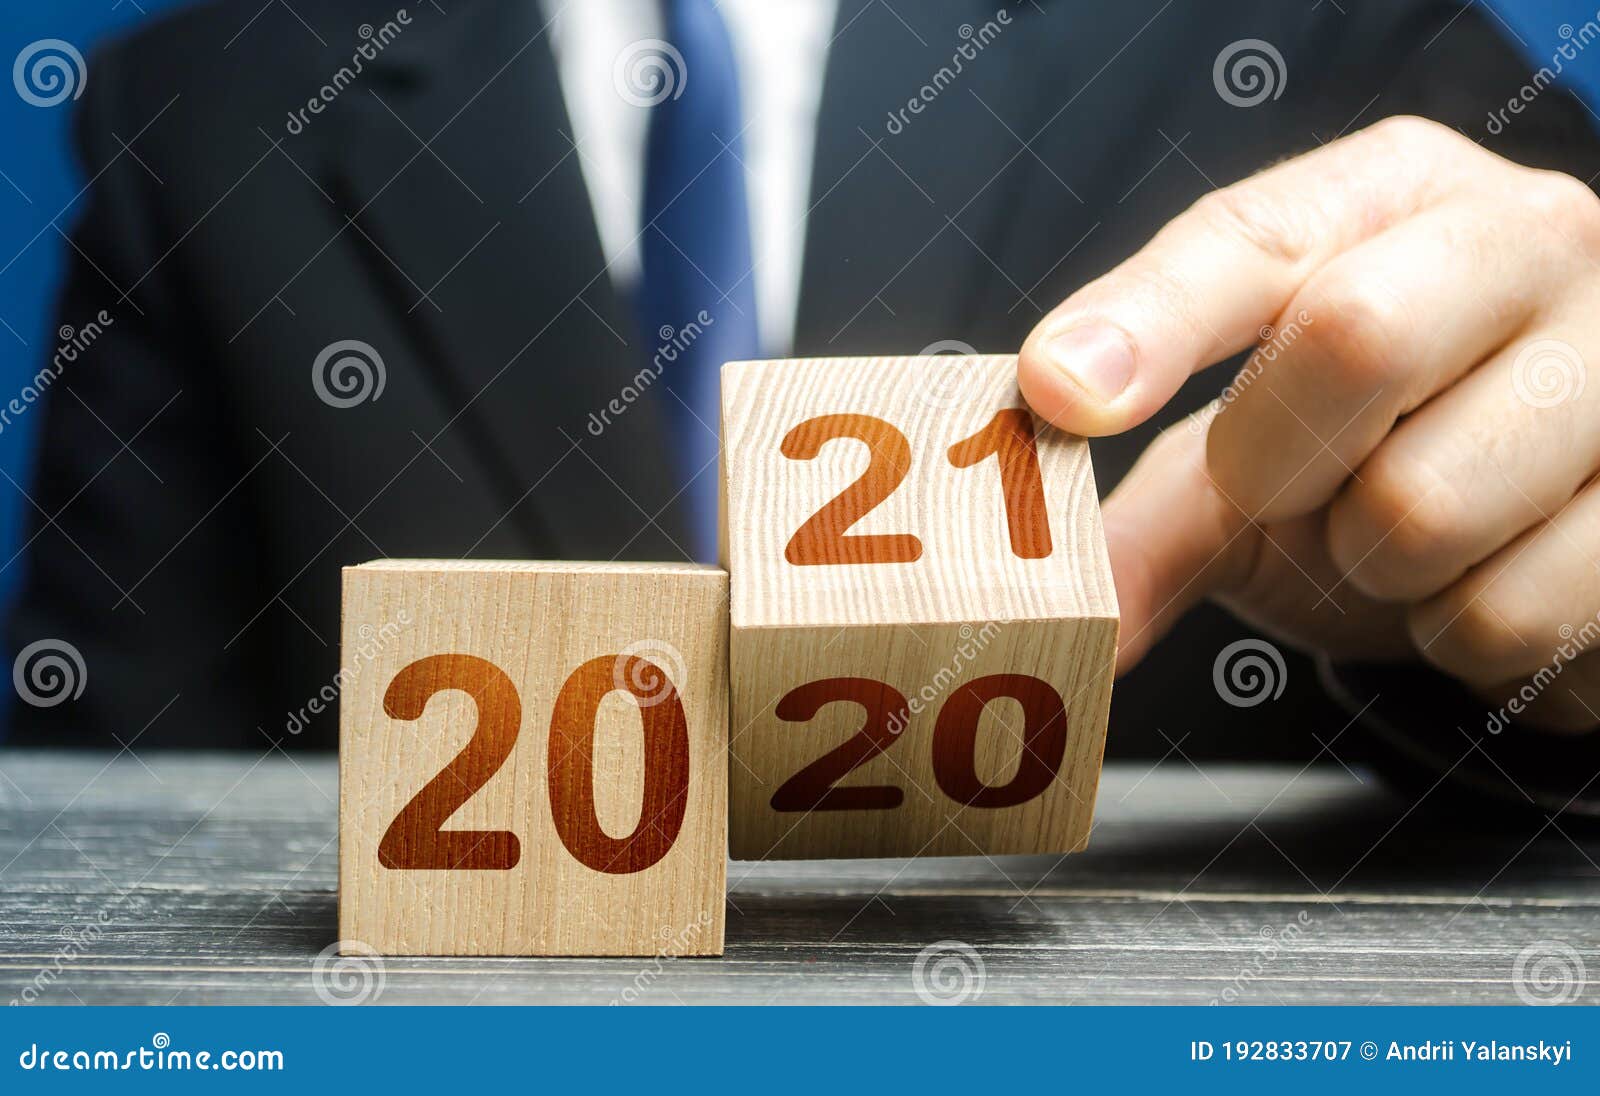 hand flips a block changing 2020 to 2021. new year beginning. holidays and christmas. trends and changes in the world. summing